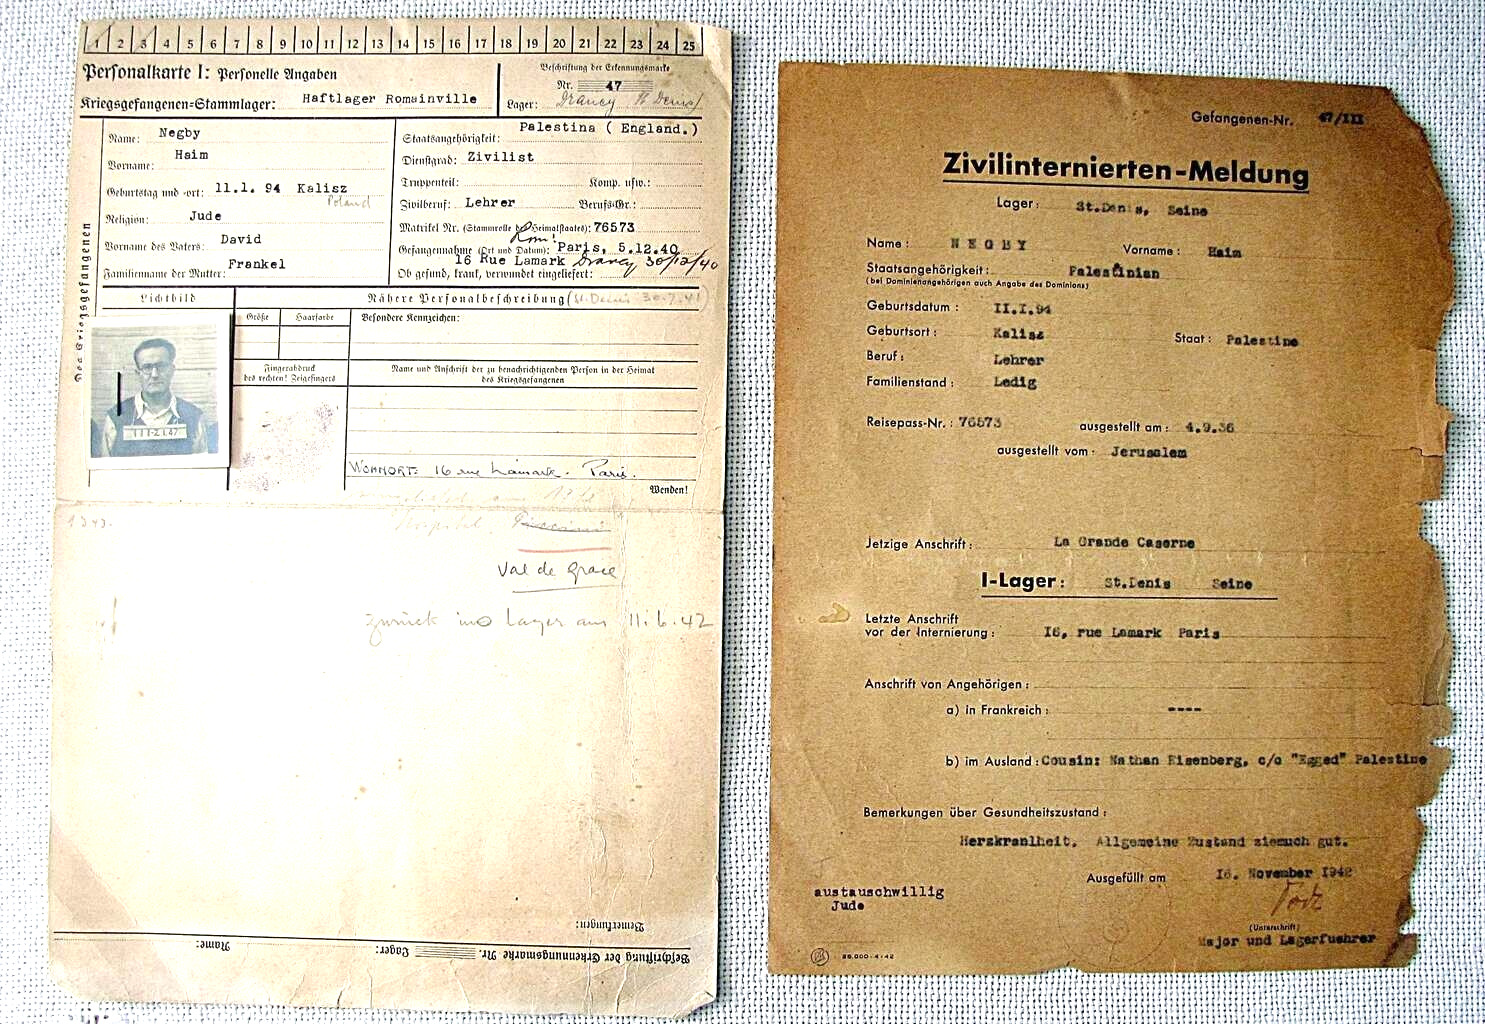 Archive of Holocaust survivor Chaim Negby with his Personal camp card and other